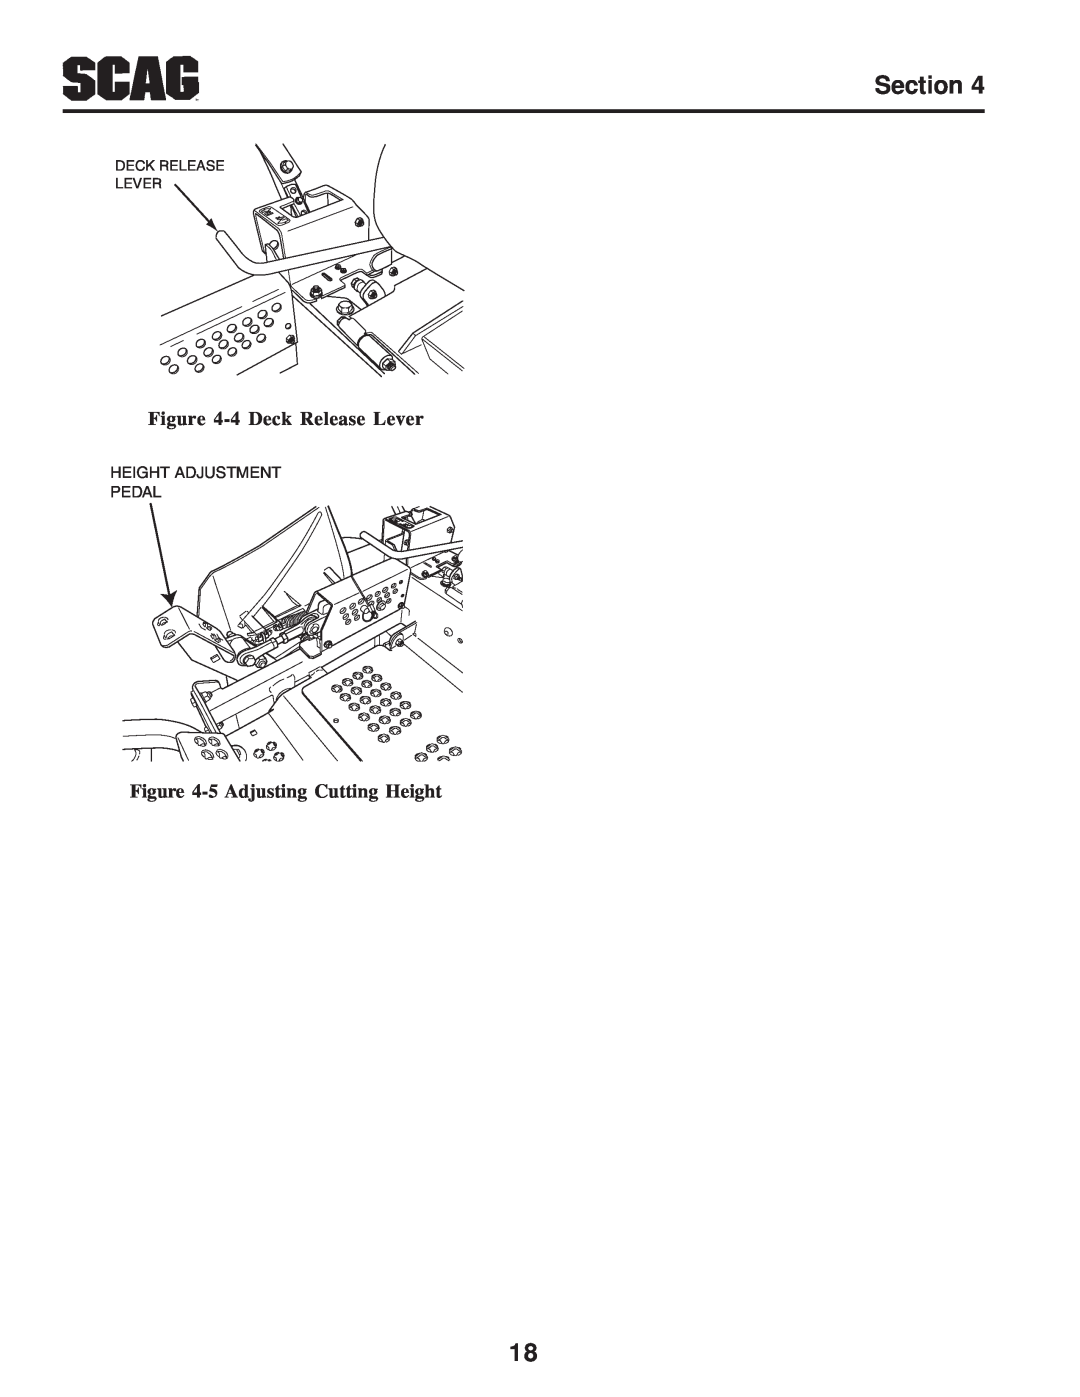 Scag Power Equipment SZC manual 4 Deck Release Lever, 5 Adjusting Cutting Height, Height Adjustment Pedal 